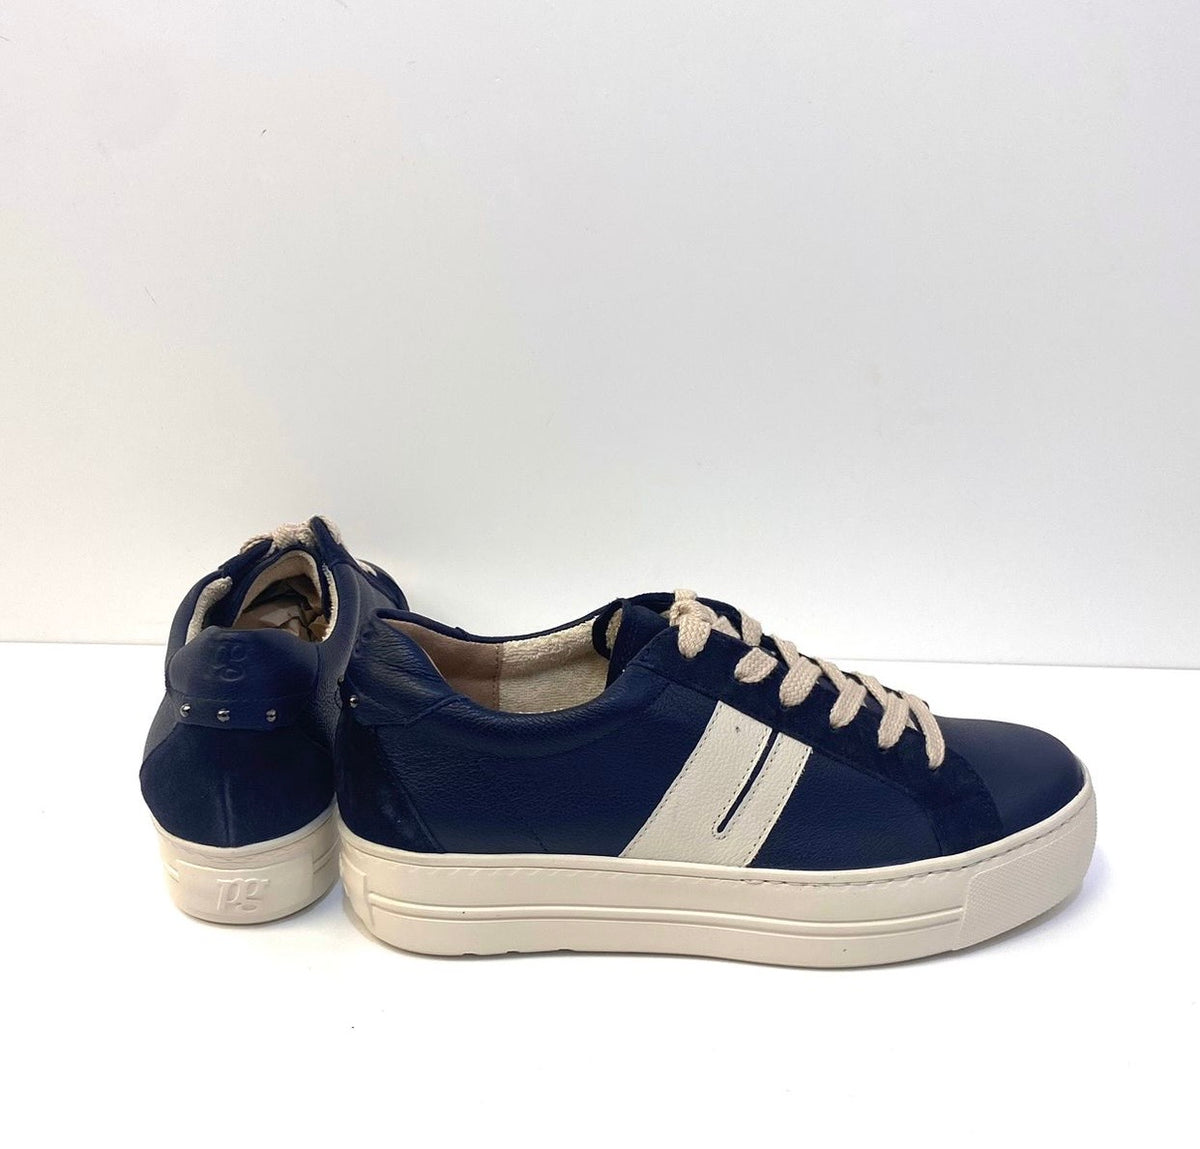 Paul Green - 5330 Navy and Cream Trainer